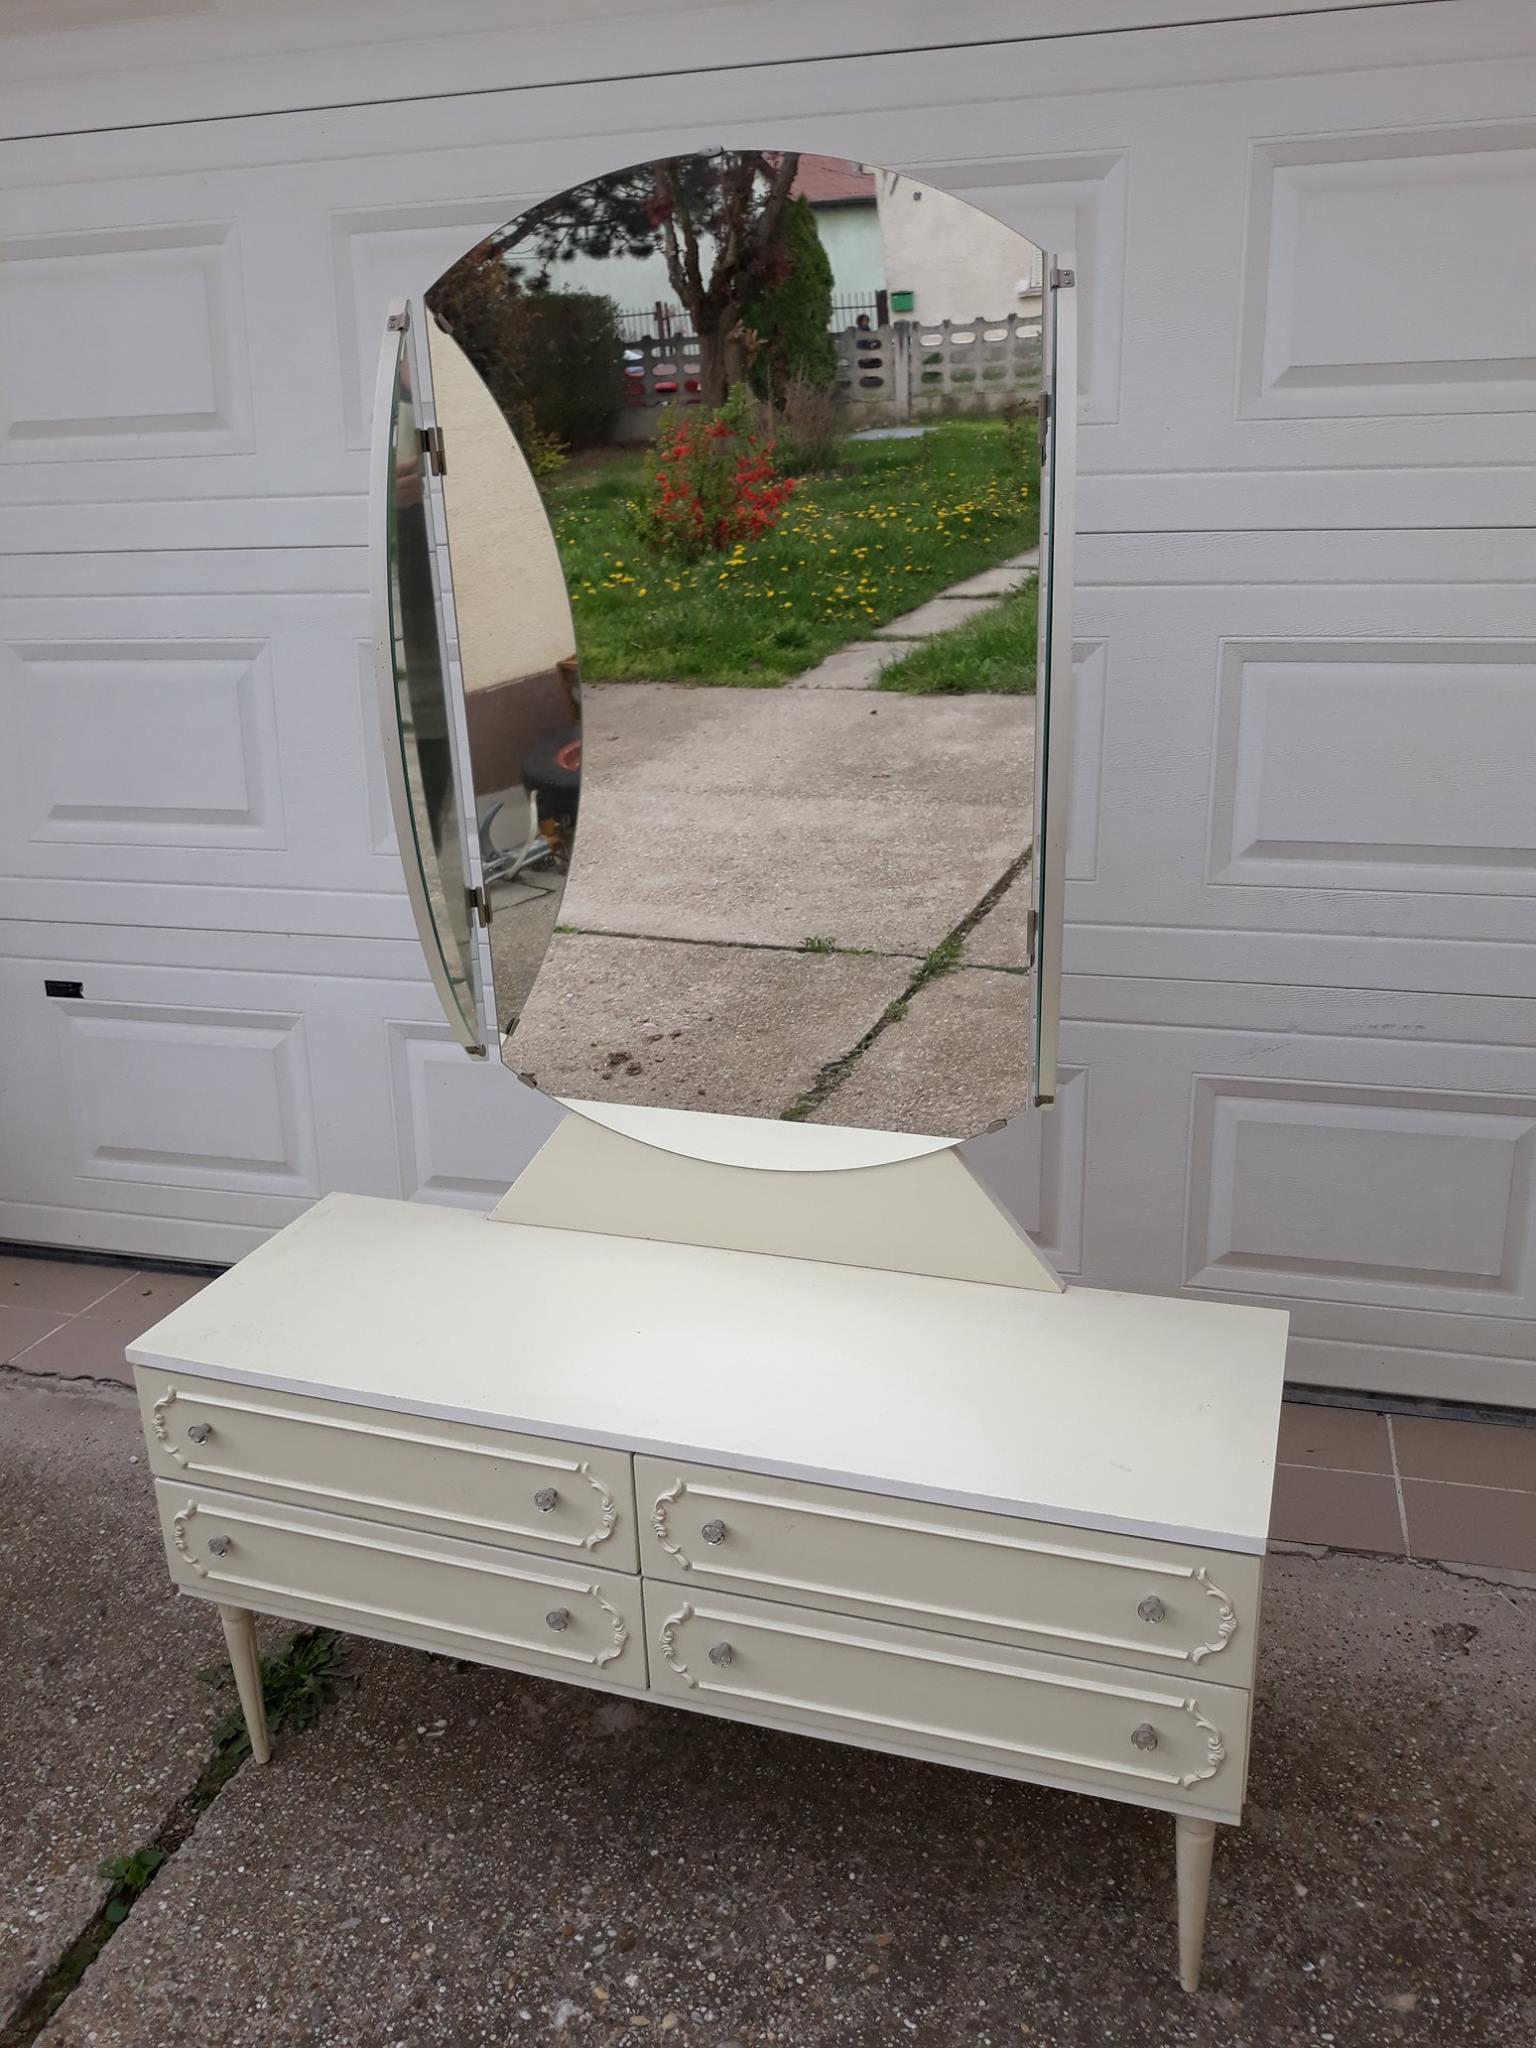 German dressing table, 1950s.
Beautiful dressing table from the 1950s
Size: 110 x 39 x 160 H
Mirror size: Q 1 m.